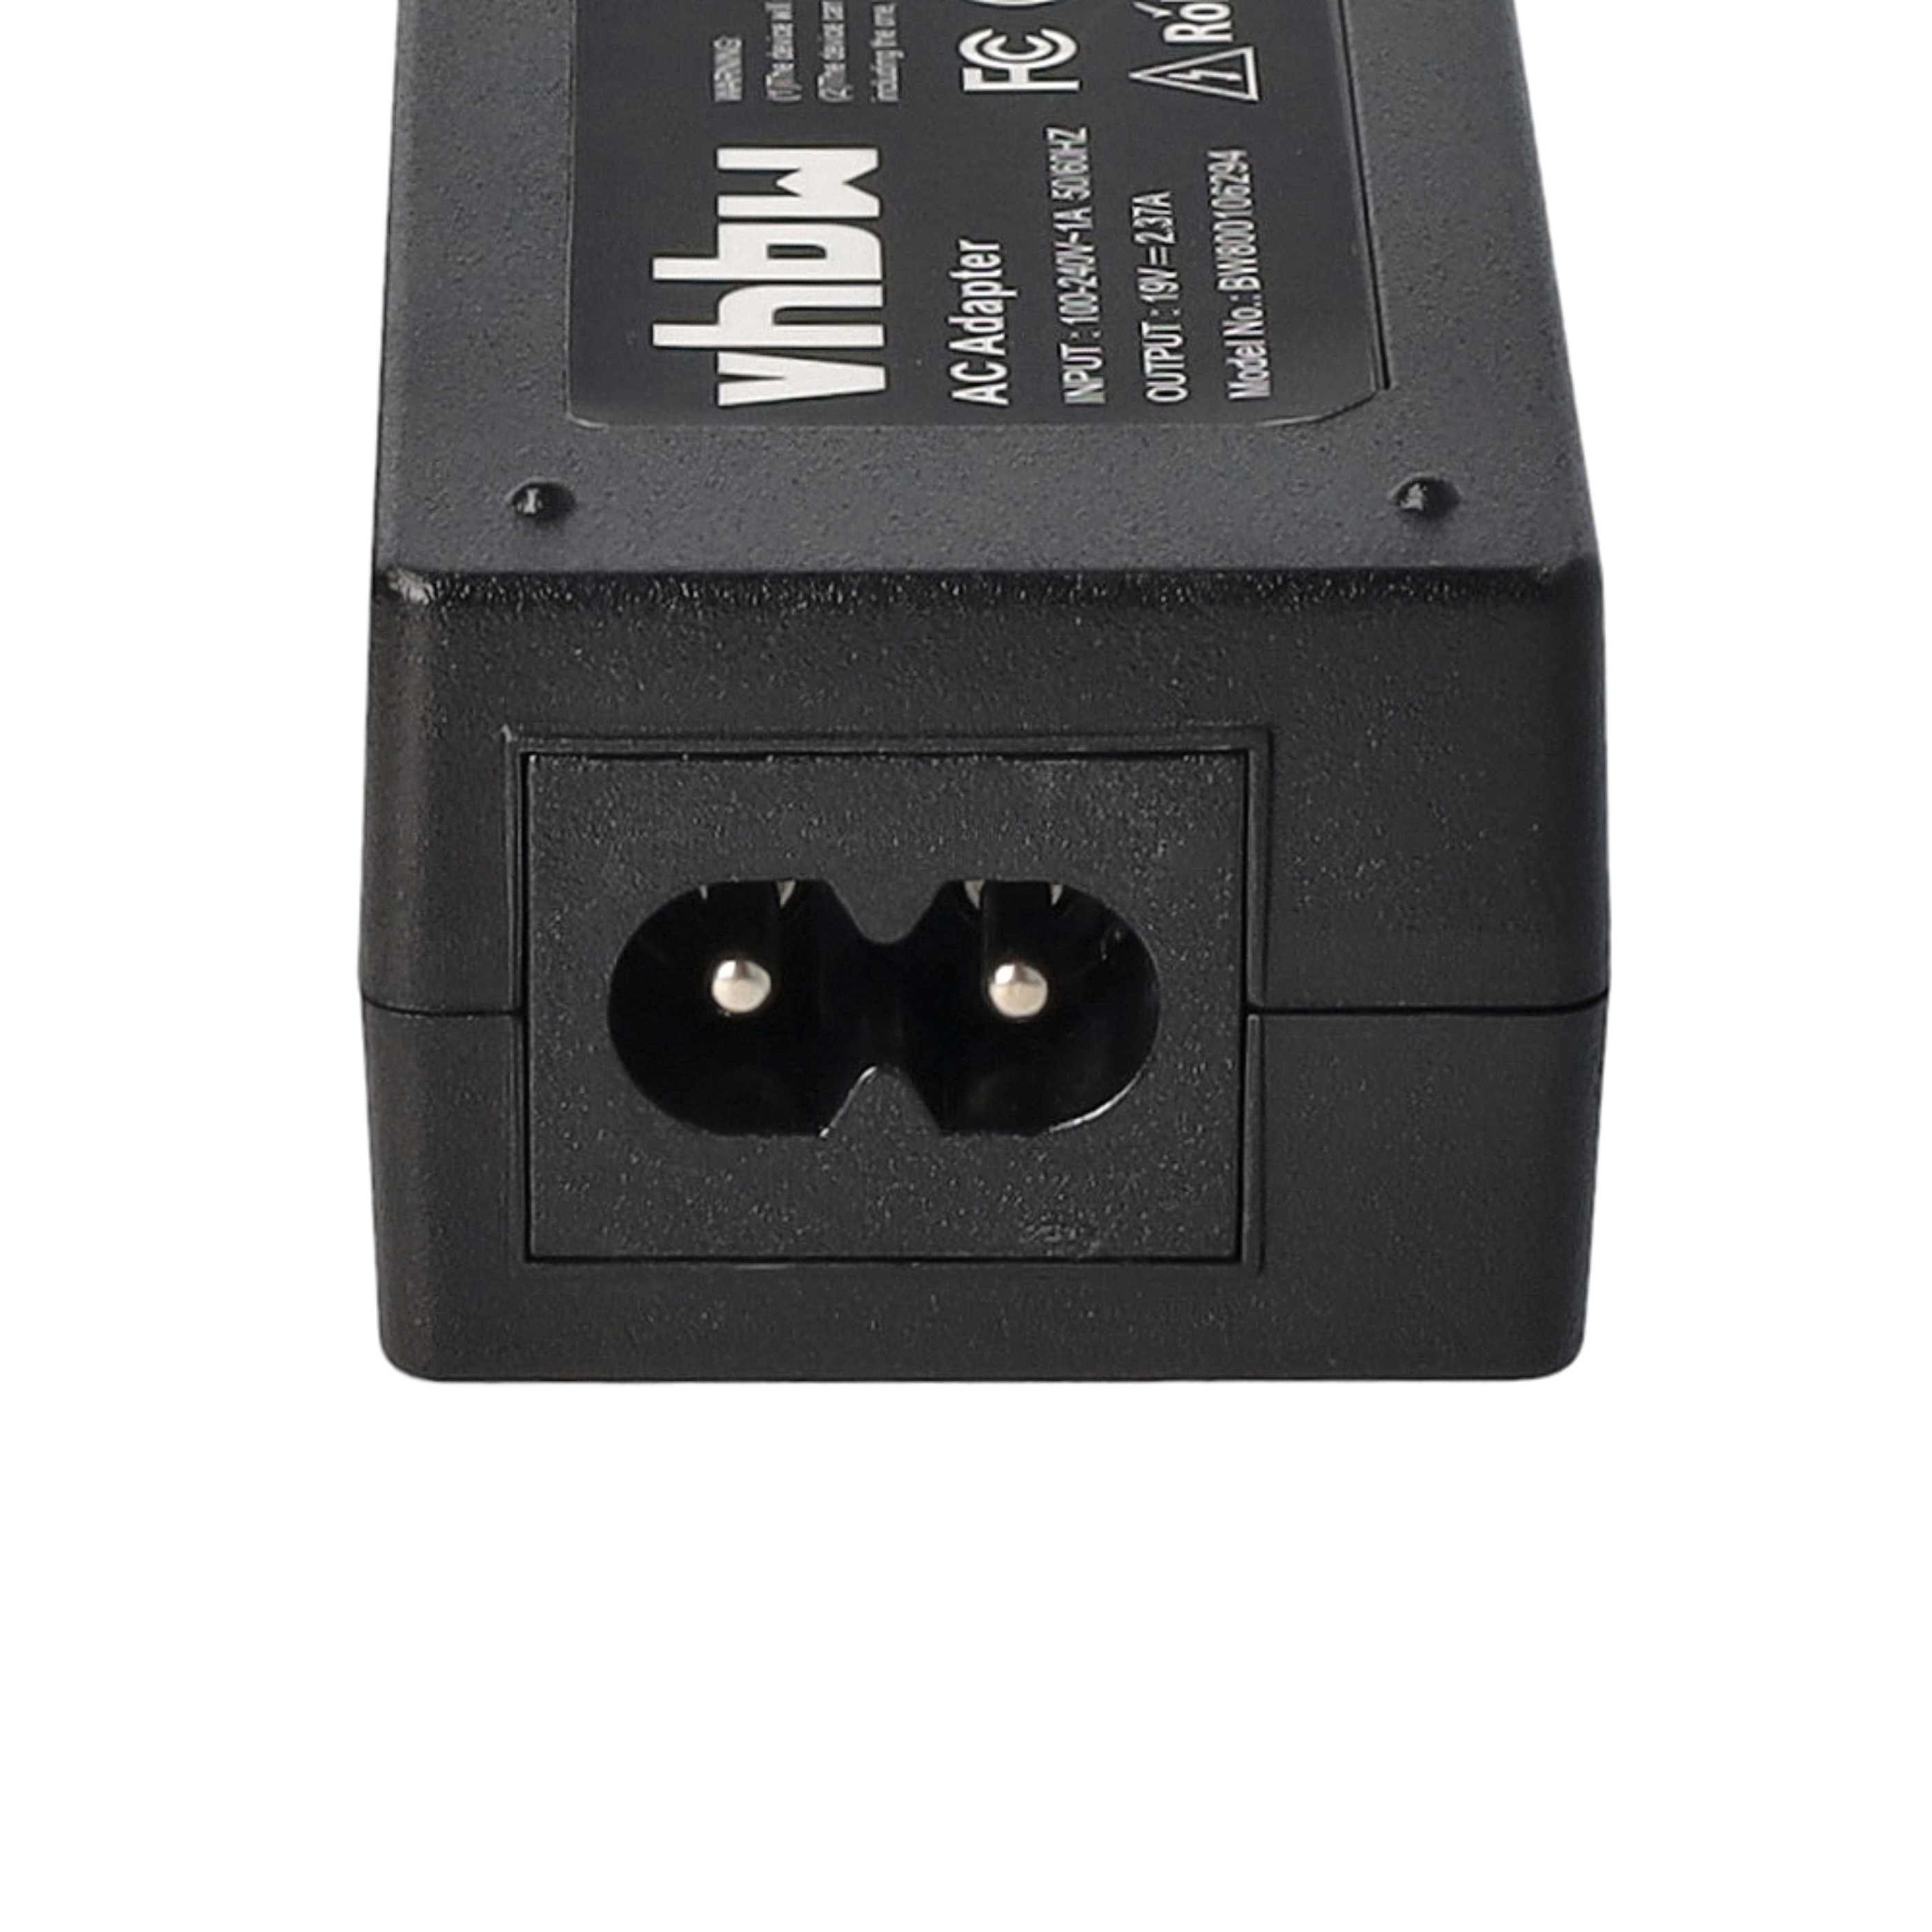 Mains Power Adapter replaces Toshiba PA3822 for BenQNotebook etc., 45 W